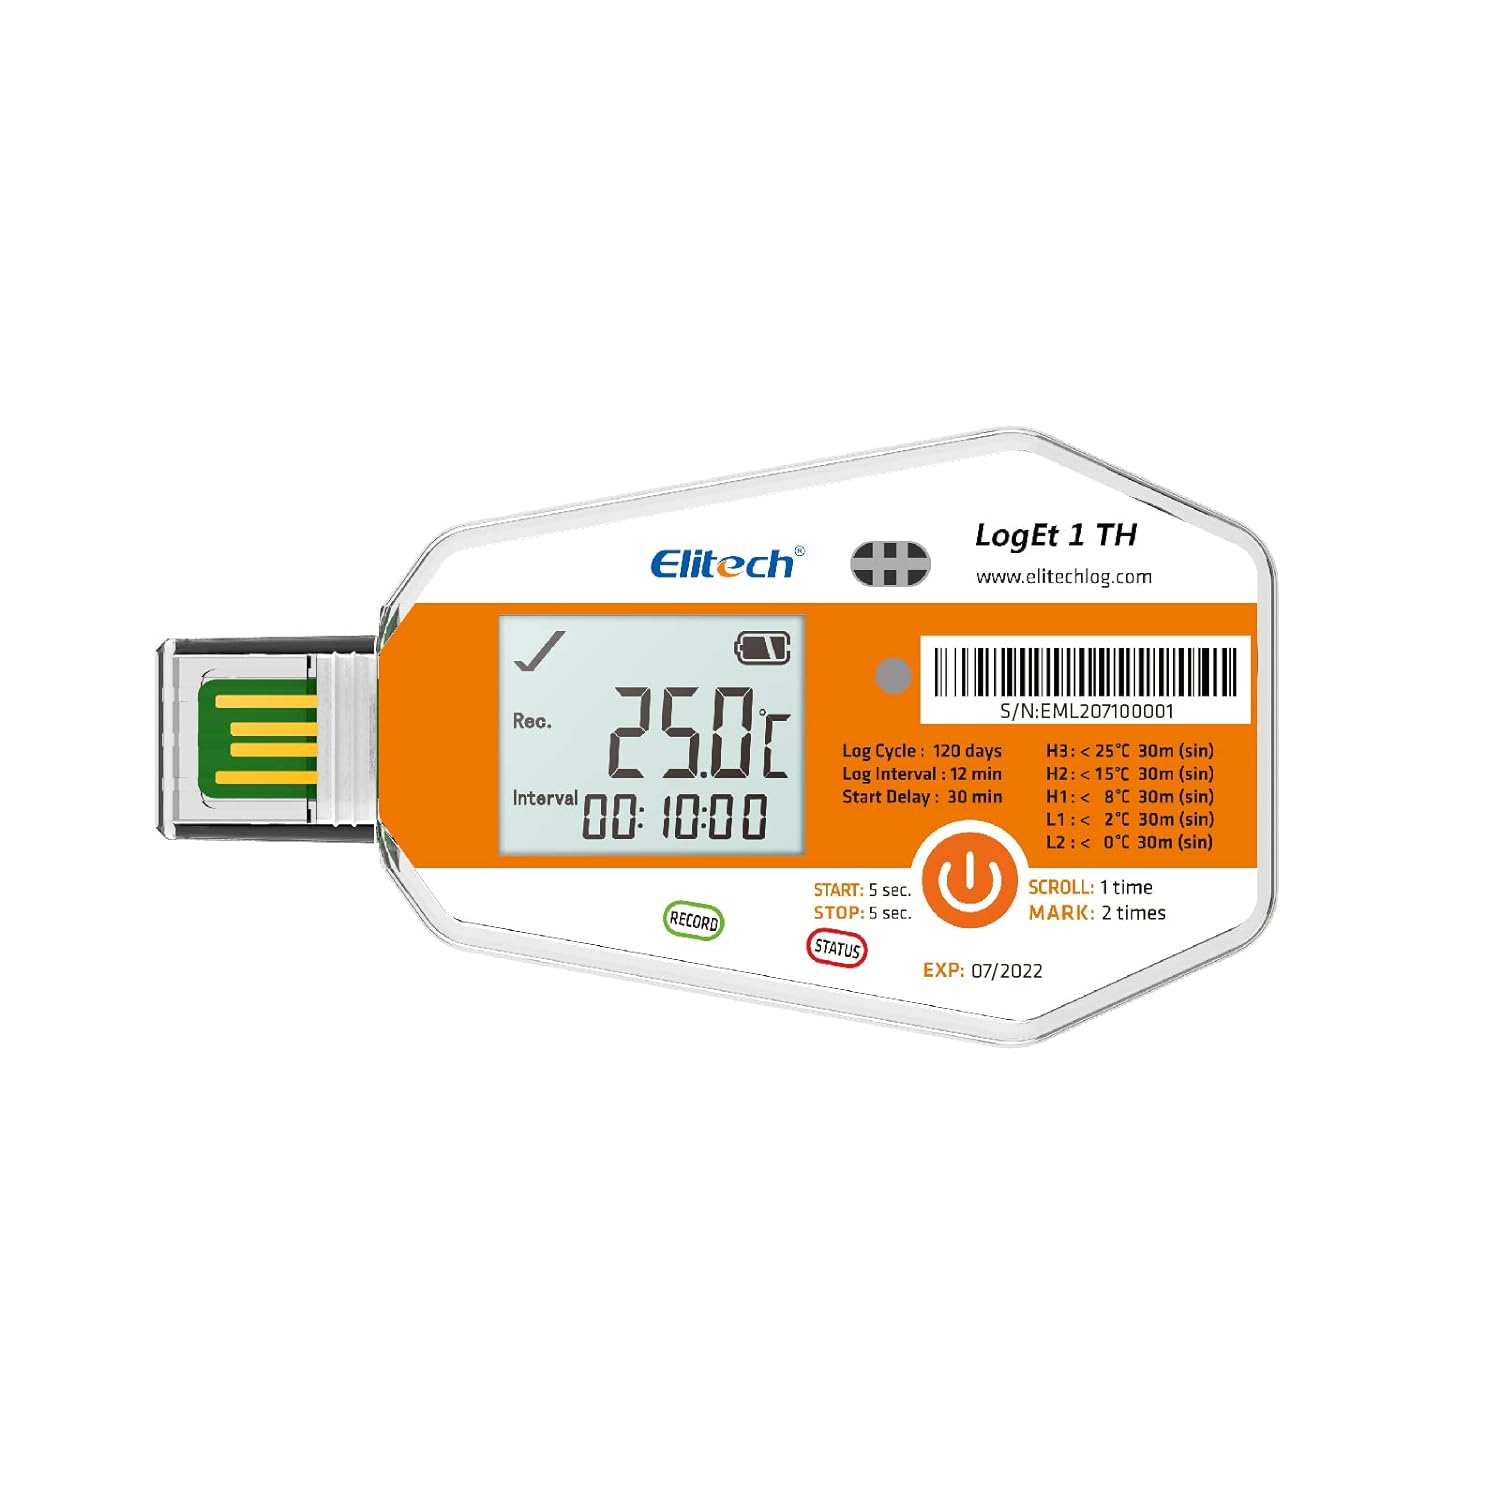 Elitech LogEt 1 TH Single Use Temperature And Humidity Data Logger